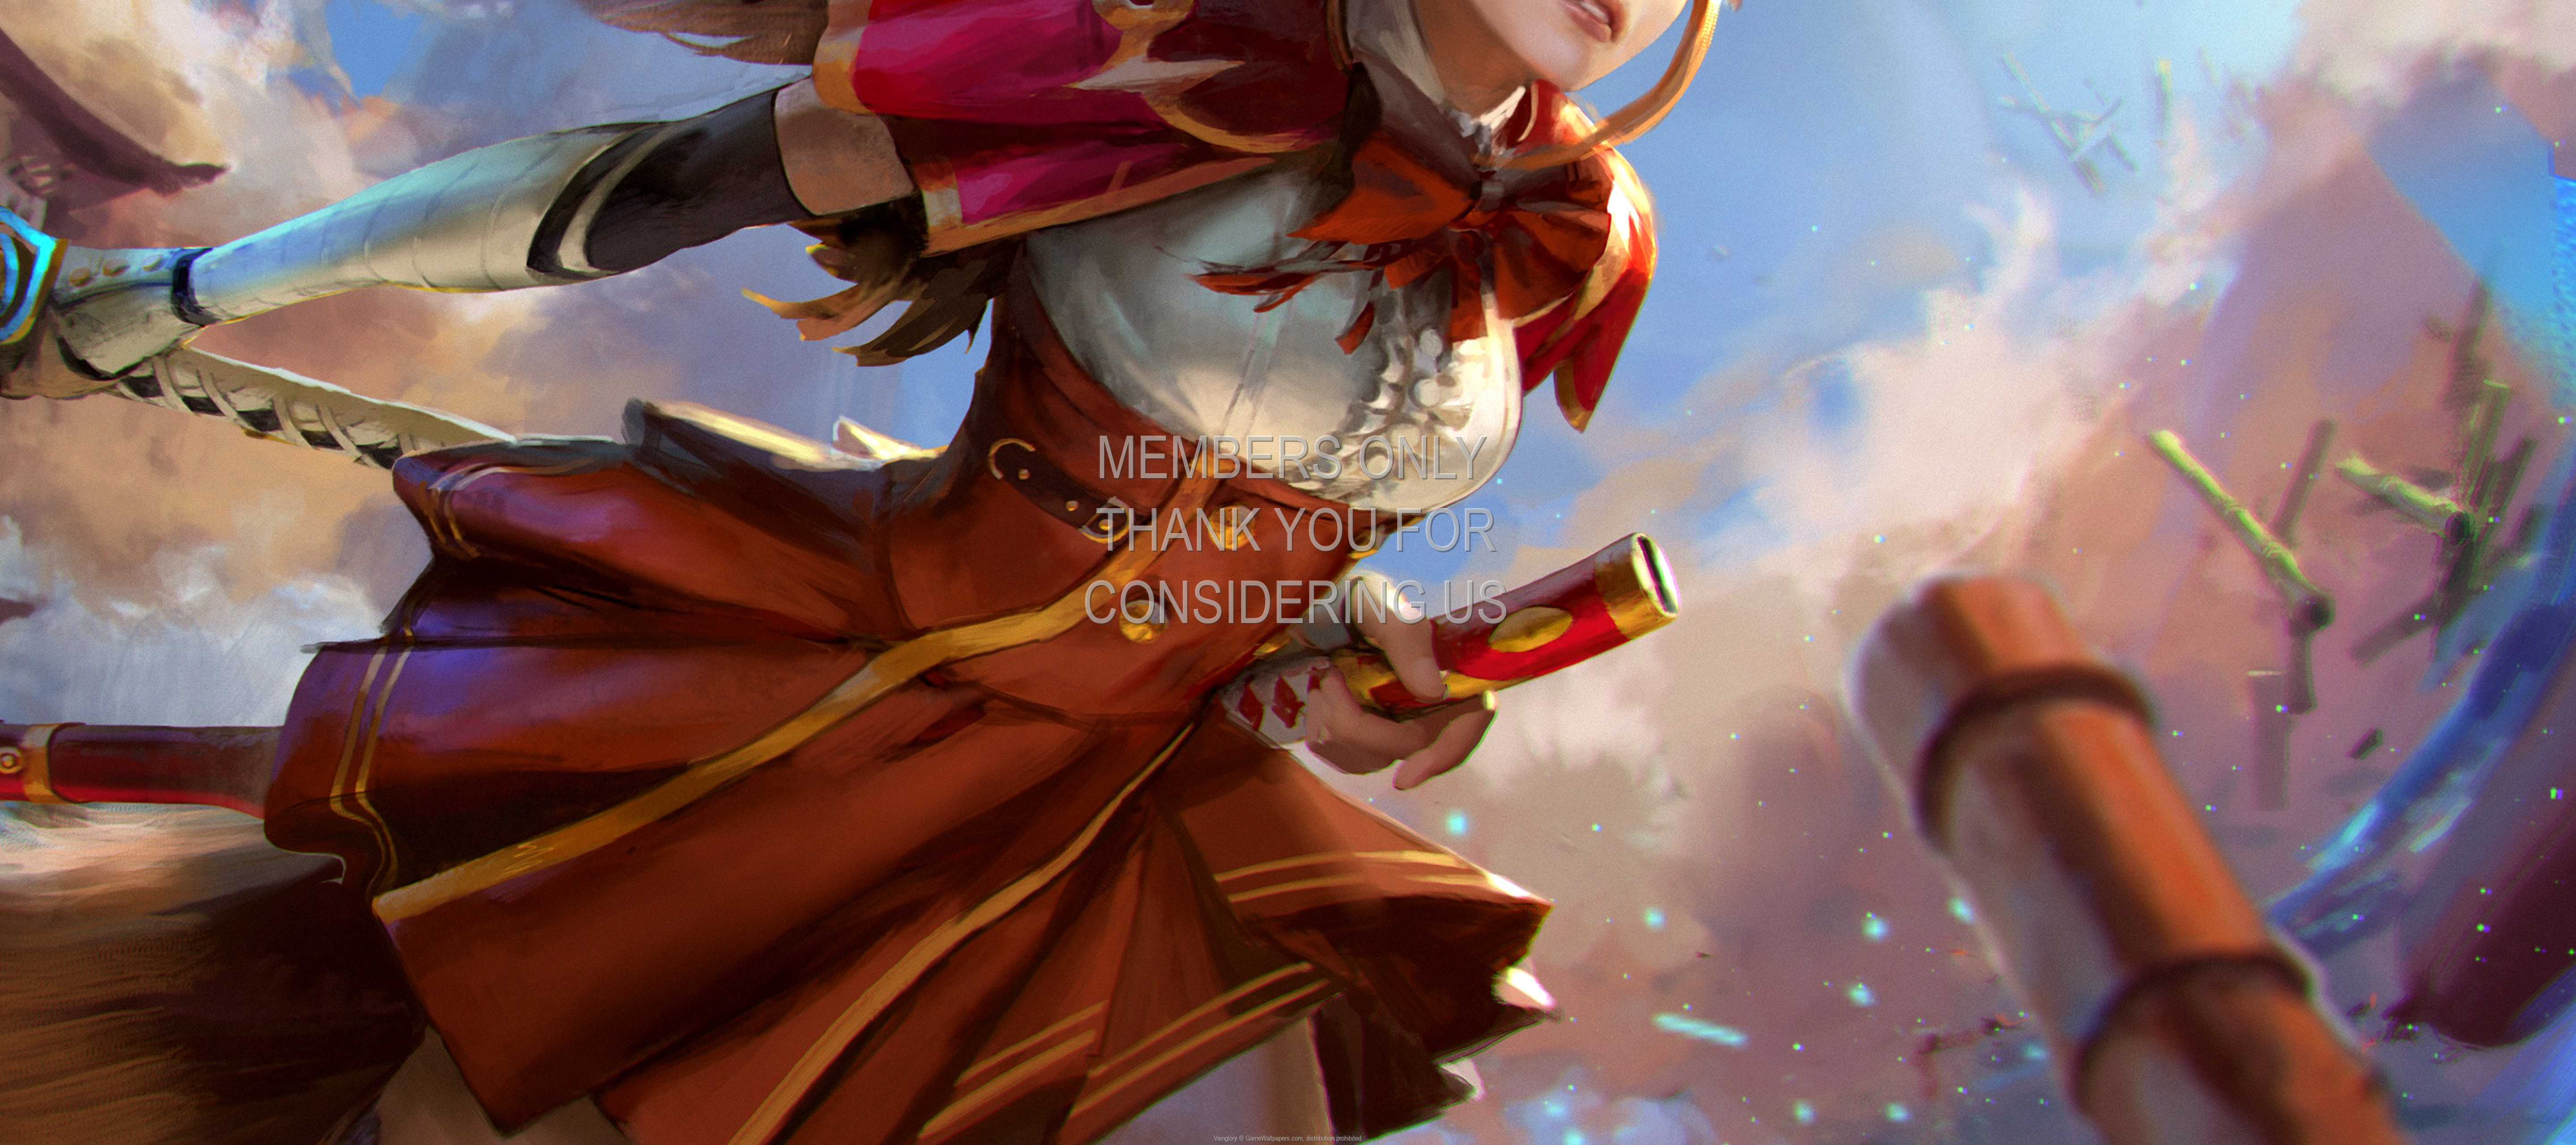 Vainglory 1440p%20Horizontal Mobile wallpaper or background 04